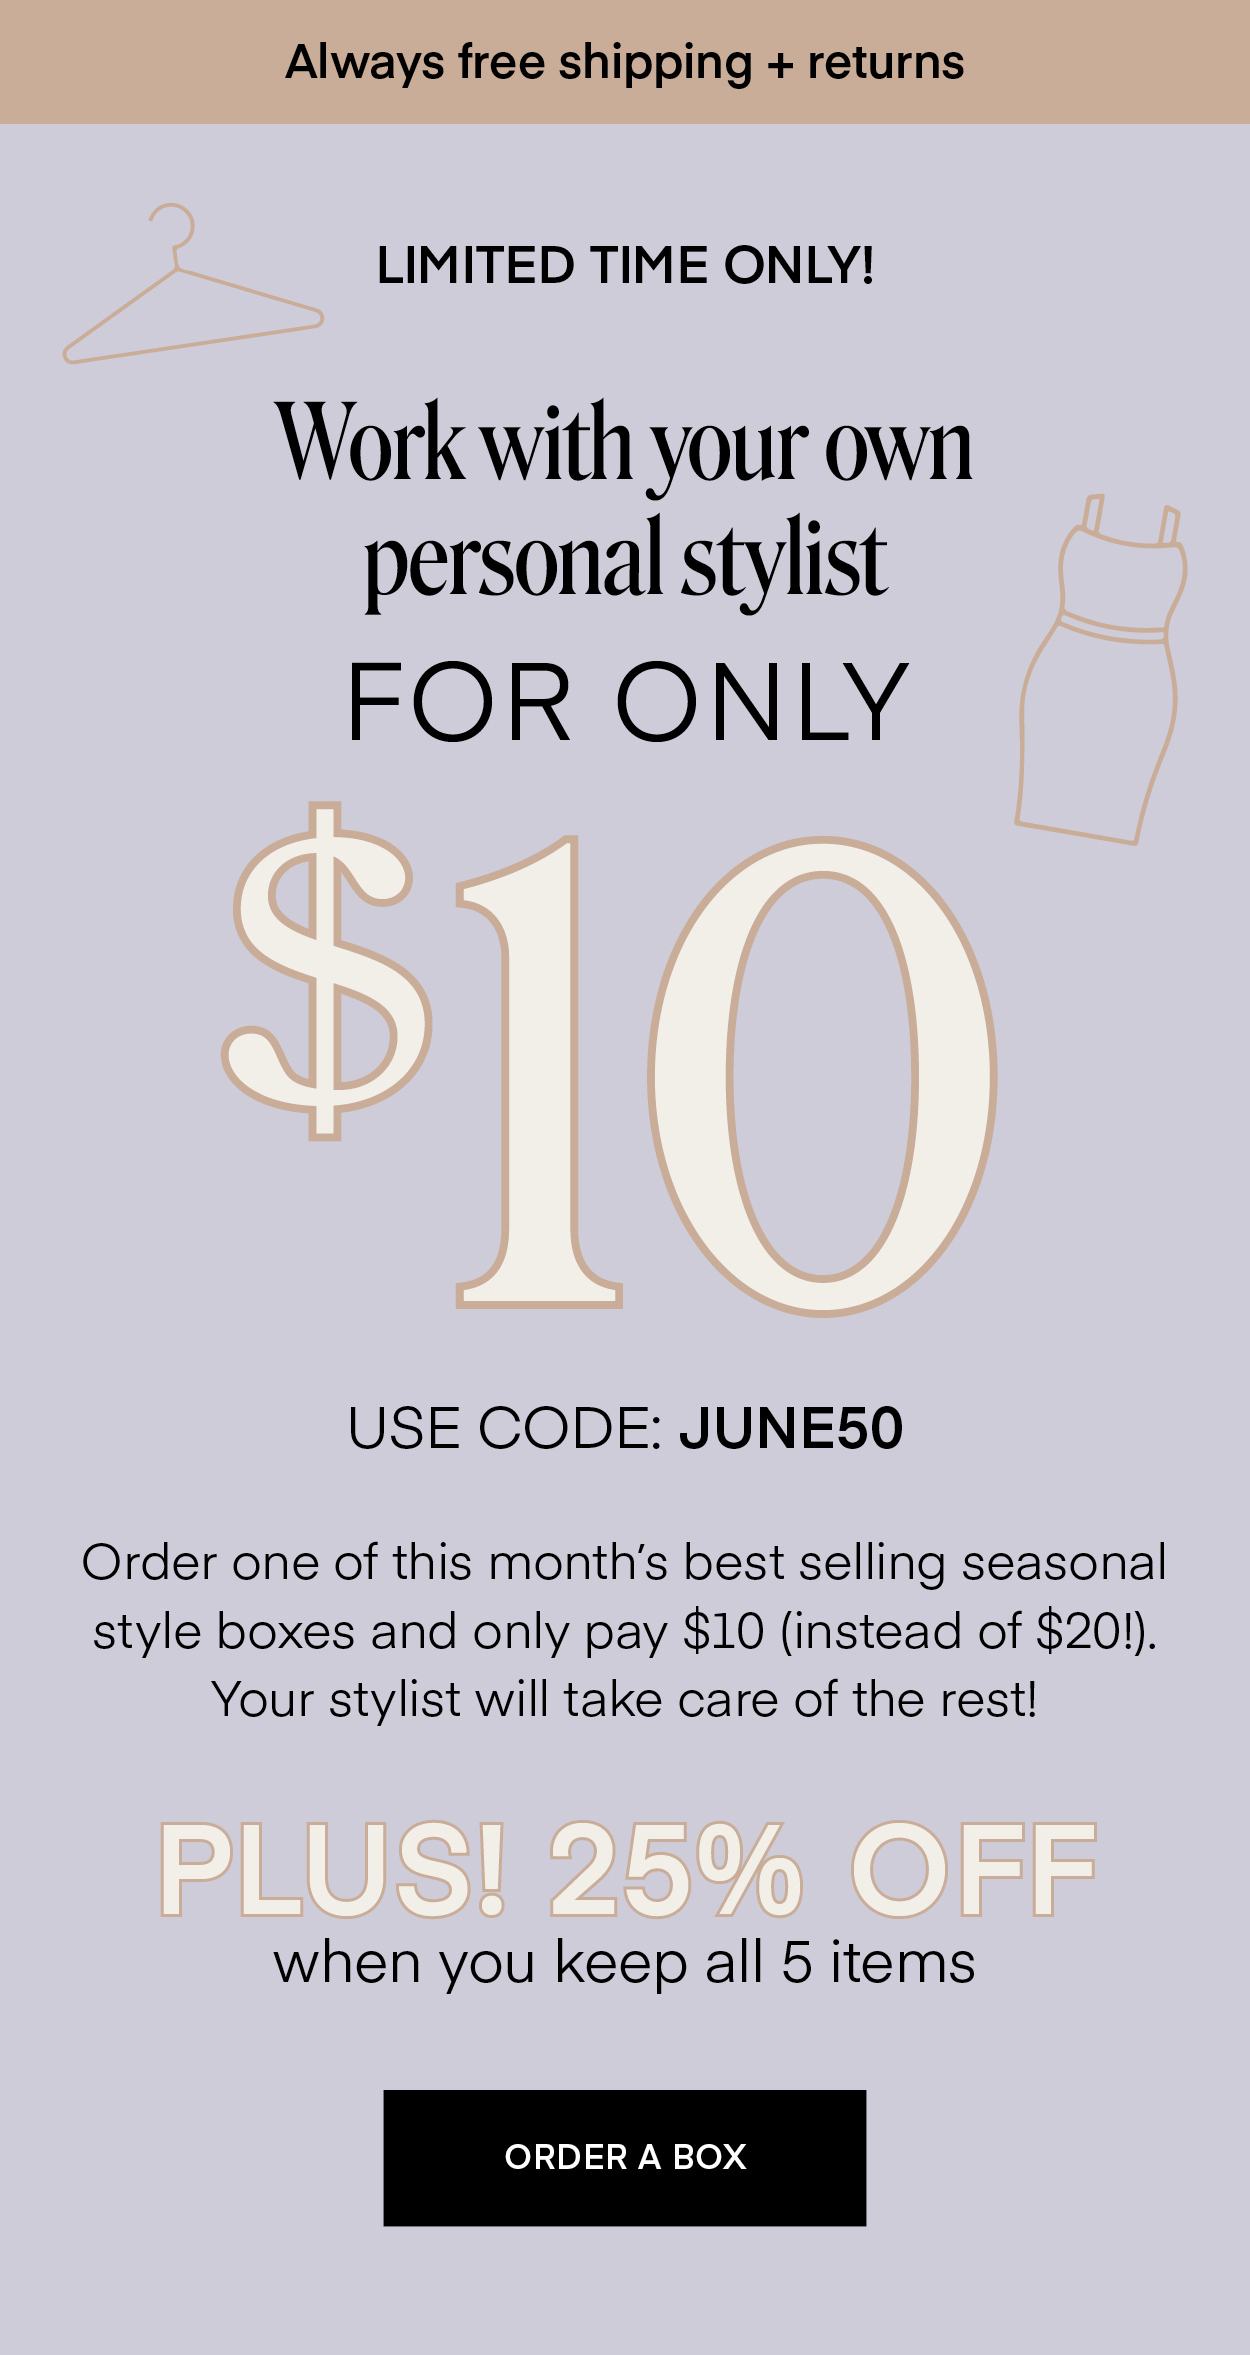 Always free shipping + returns LIMITED TIME ONLY! Work with your own personal stylist FOR ONLY $10 USE CODE: JUNE50 Order one of this month's best selling seasonal style boxes and only pay $10 (instead of $20!). Your stylist will take care of the rest! PLUS! 25% OFF when you keep all 5 items ORDER A BOX